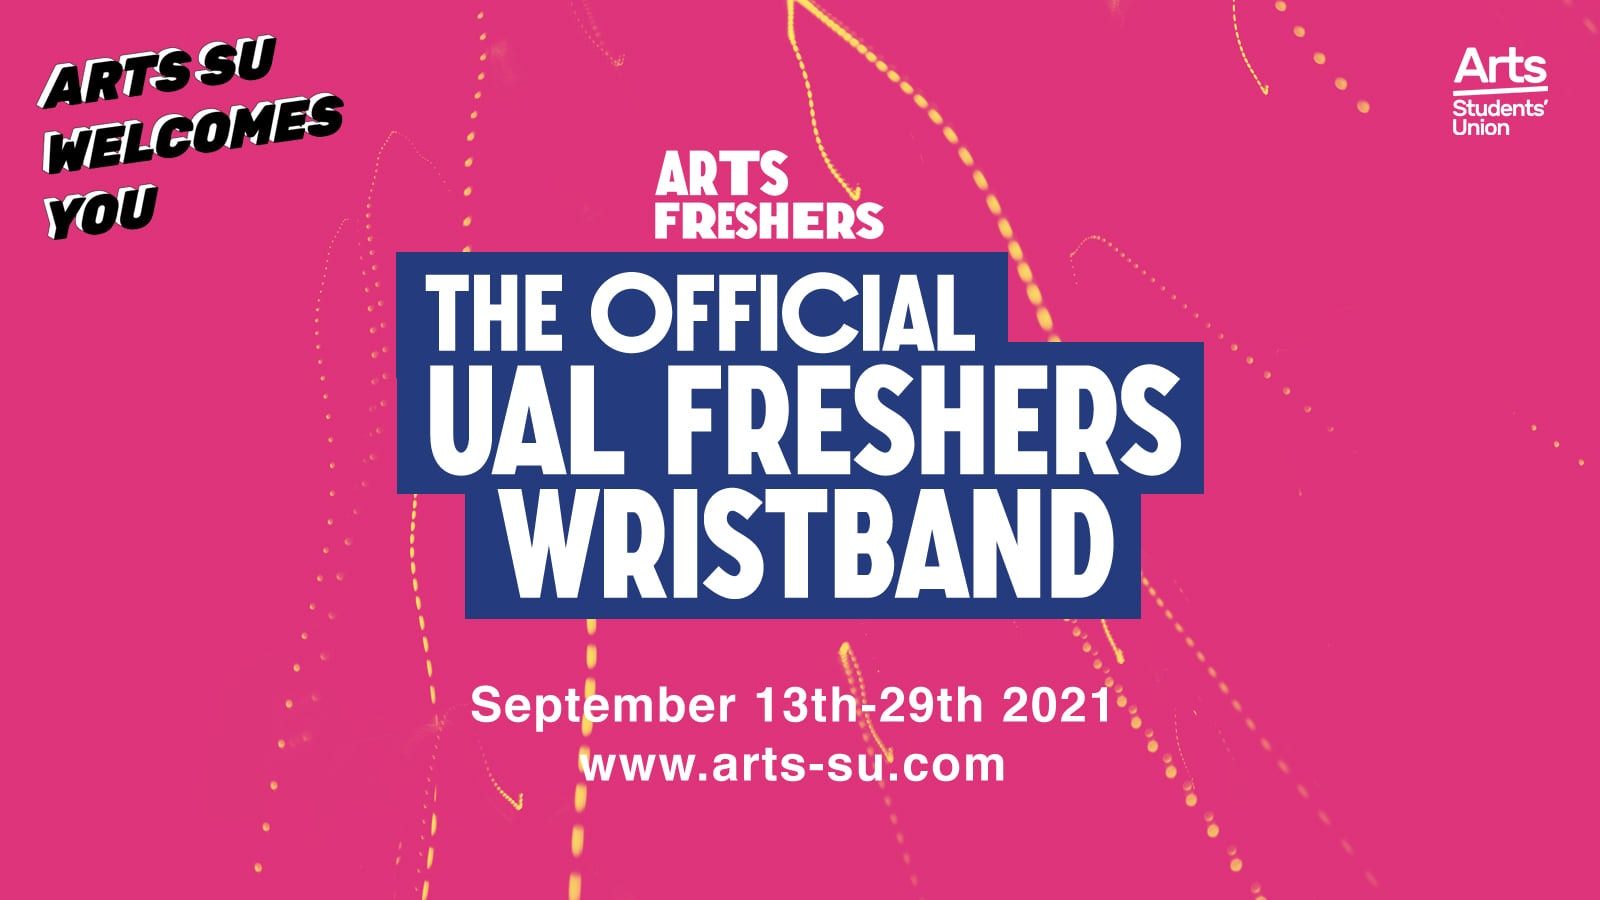 Arts Freshers 2021 Official Events Wristband